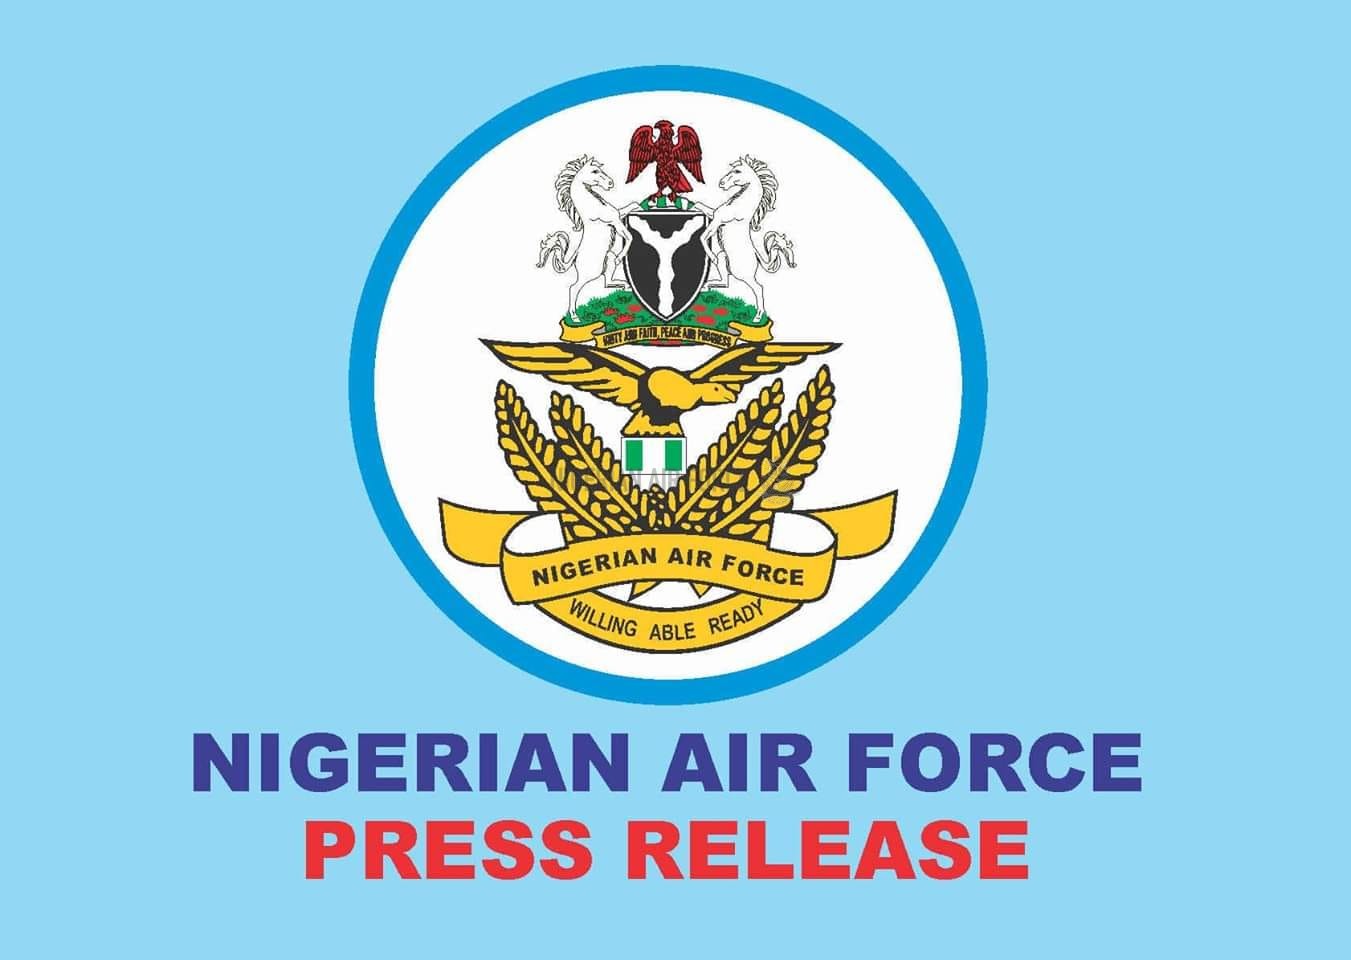 NAF LOSES SF PERSONNEL IN GUN DUEL AS TROOPS OF SECTOR 1 OF OPERATION HADARIN DAJI NEUTRALIZE 30 ARMED BANDITS AT MAJE RIVERLINE IN ZAMFARA STATE